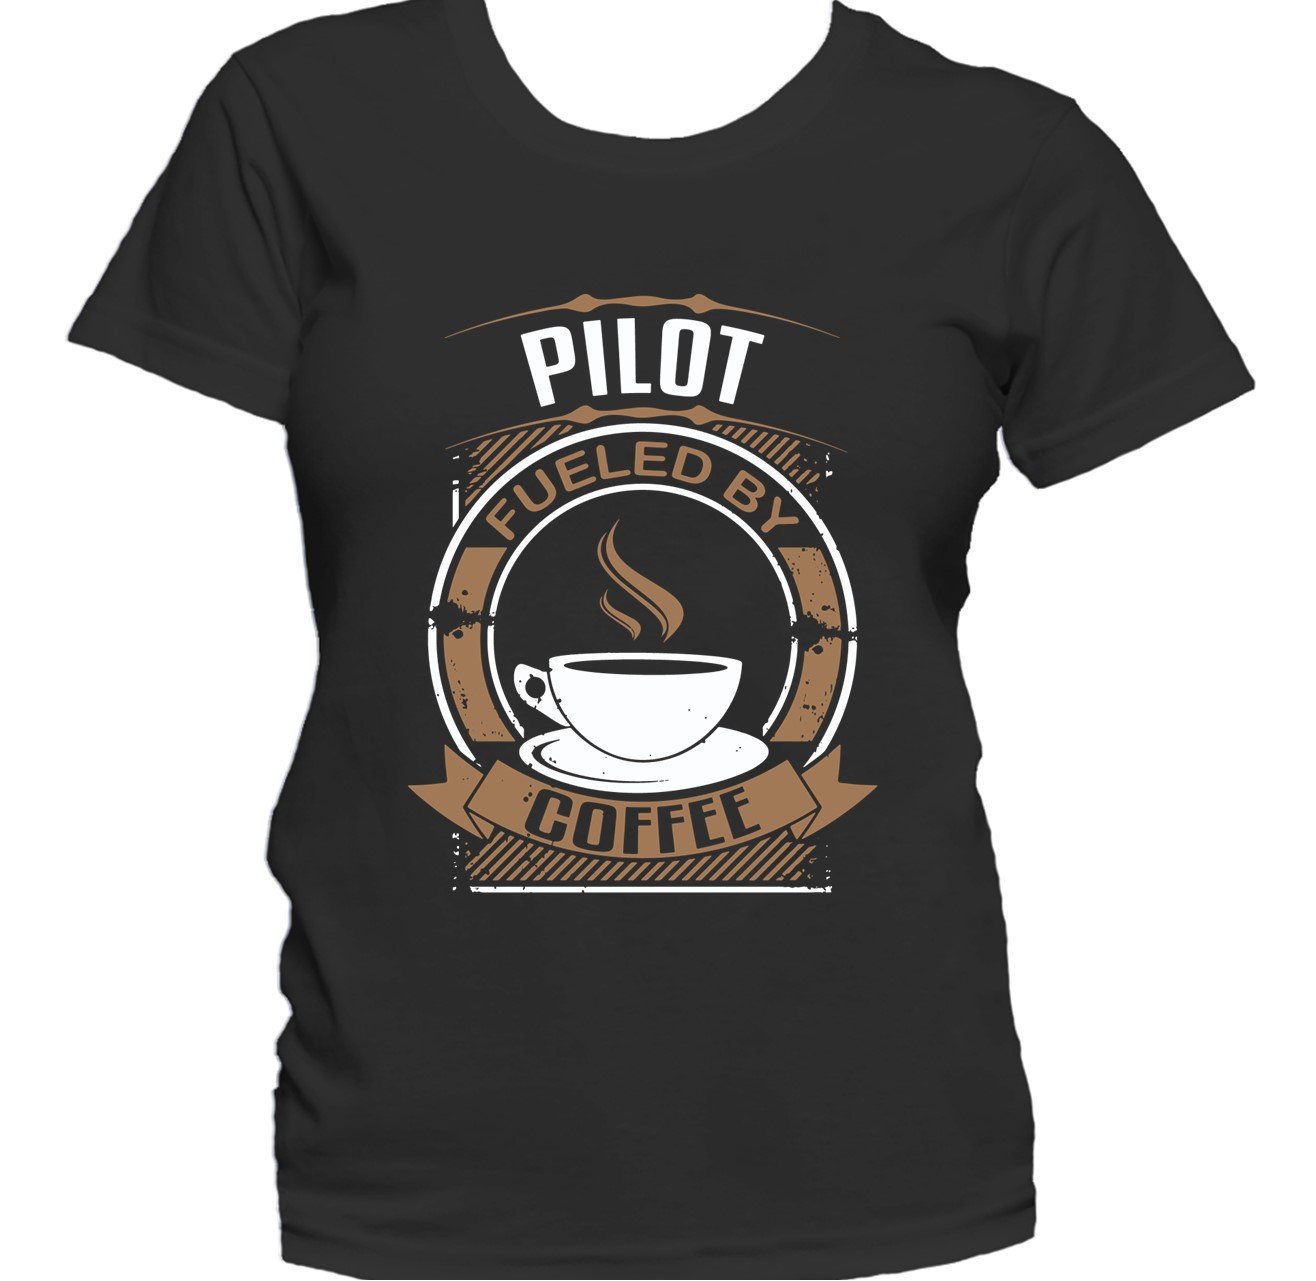 Pilot Fueled By Coffee Funny Women's T-Shirt